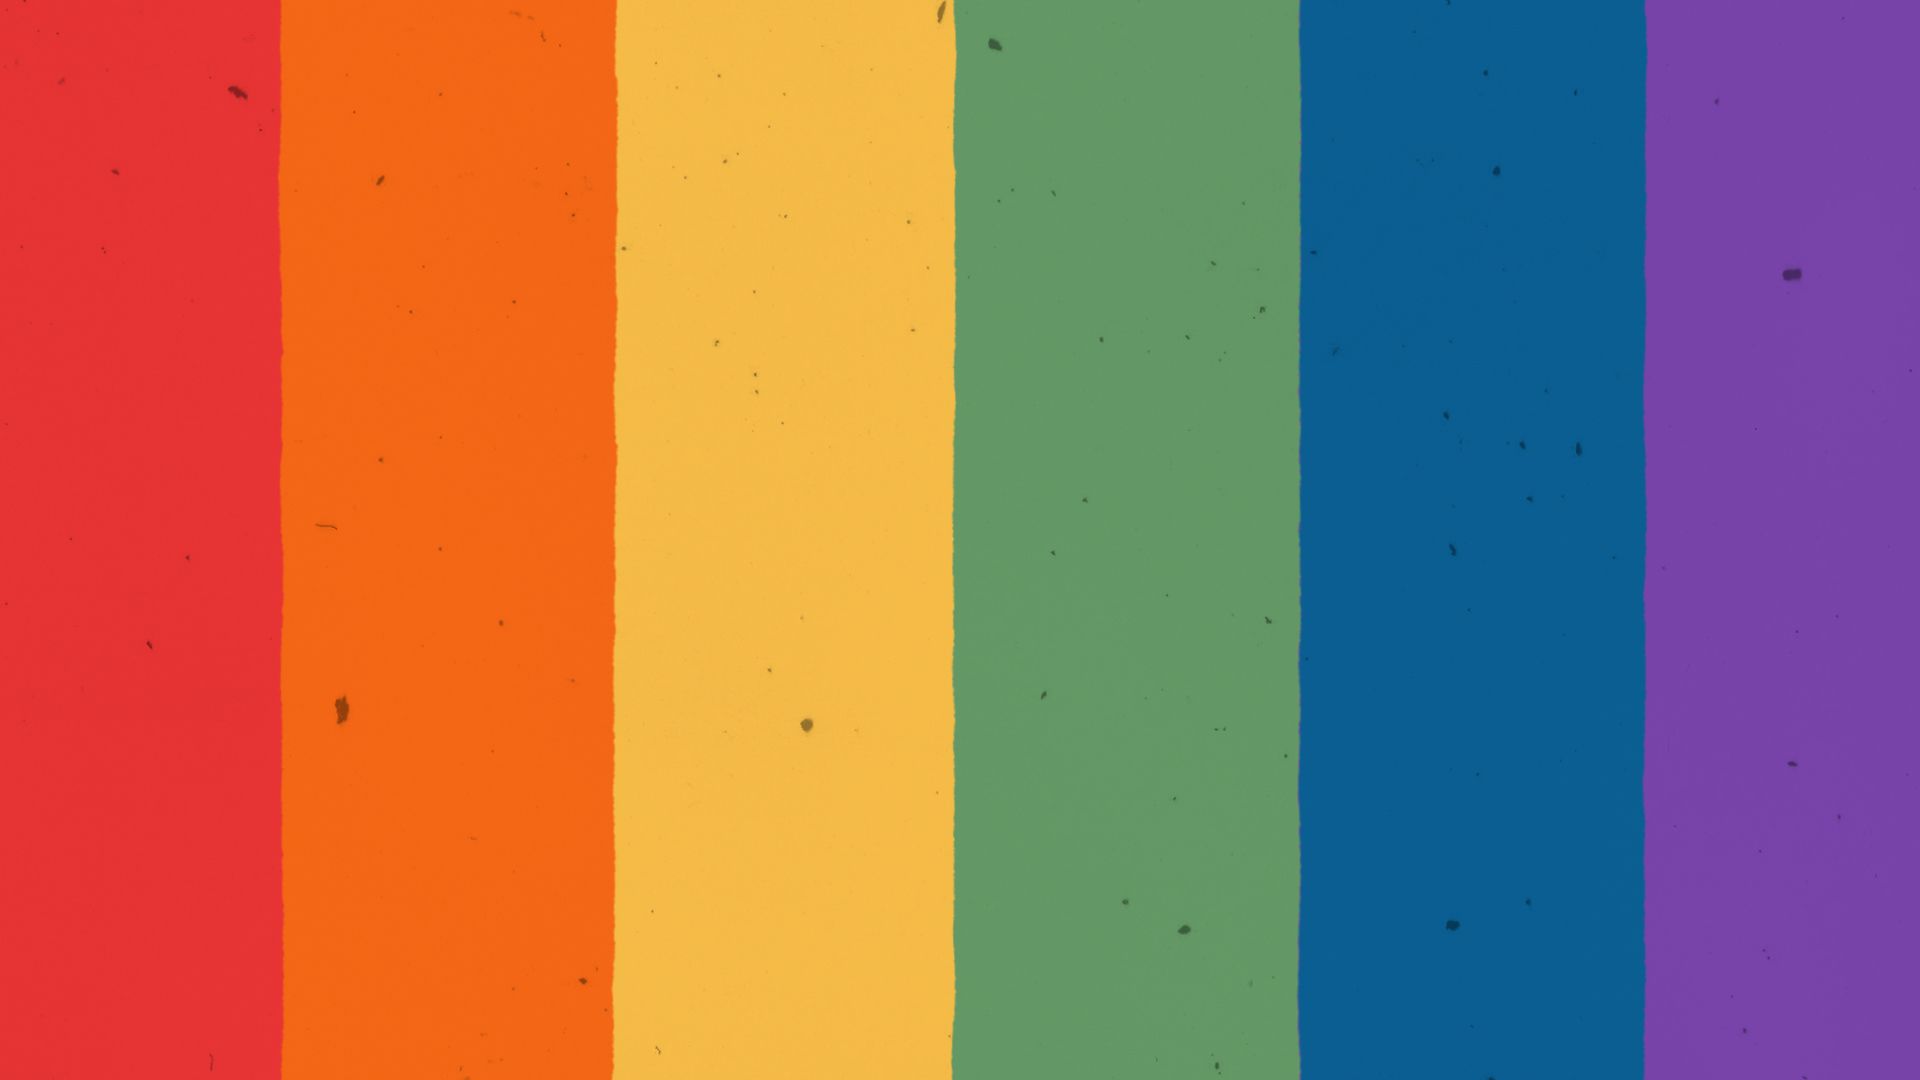 A colorful history of the rainbow flag